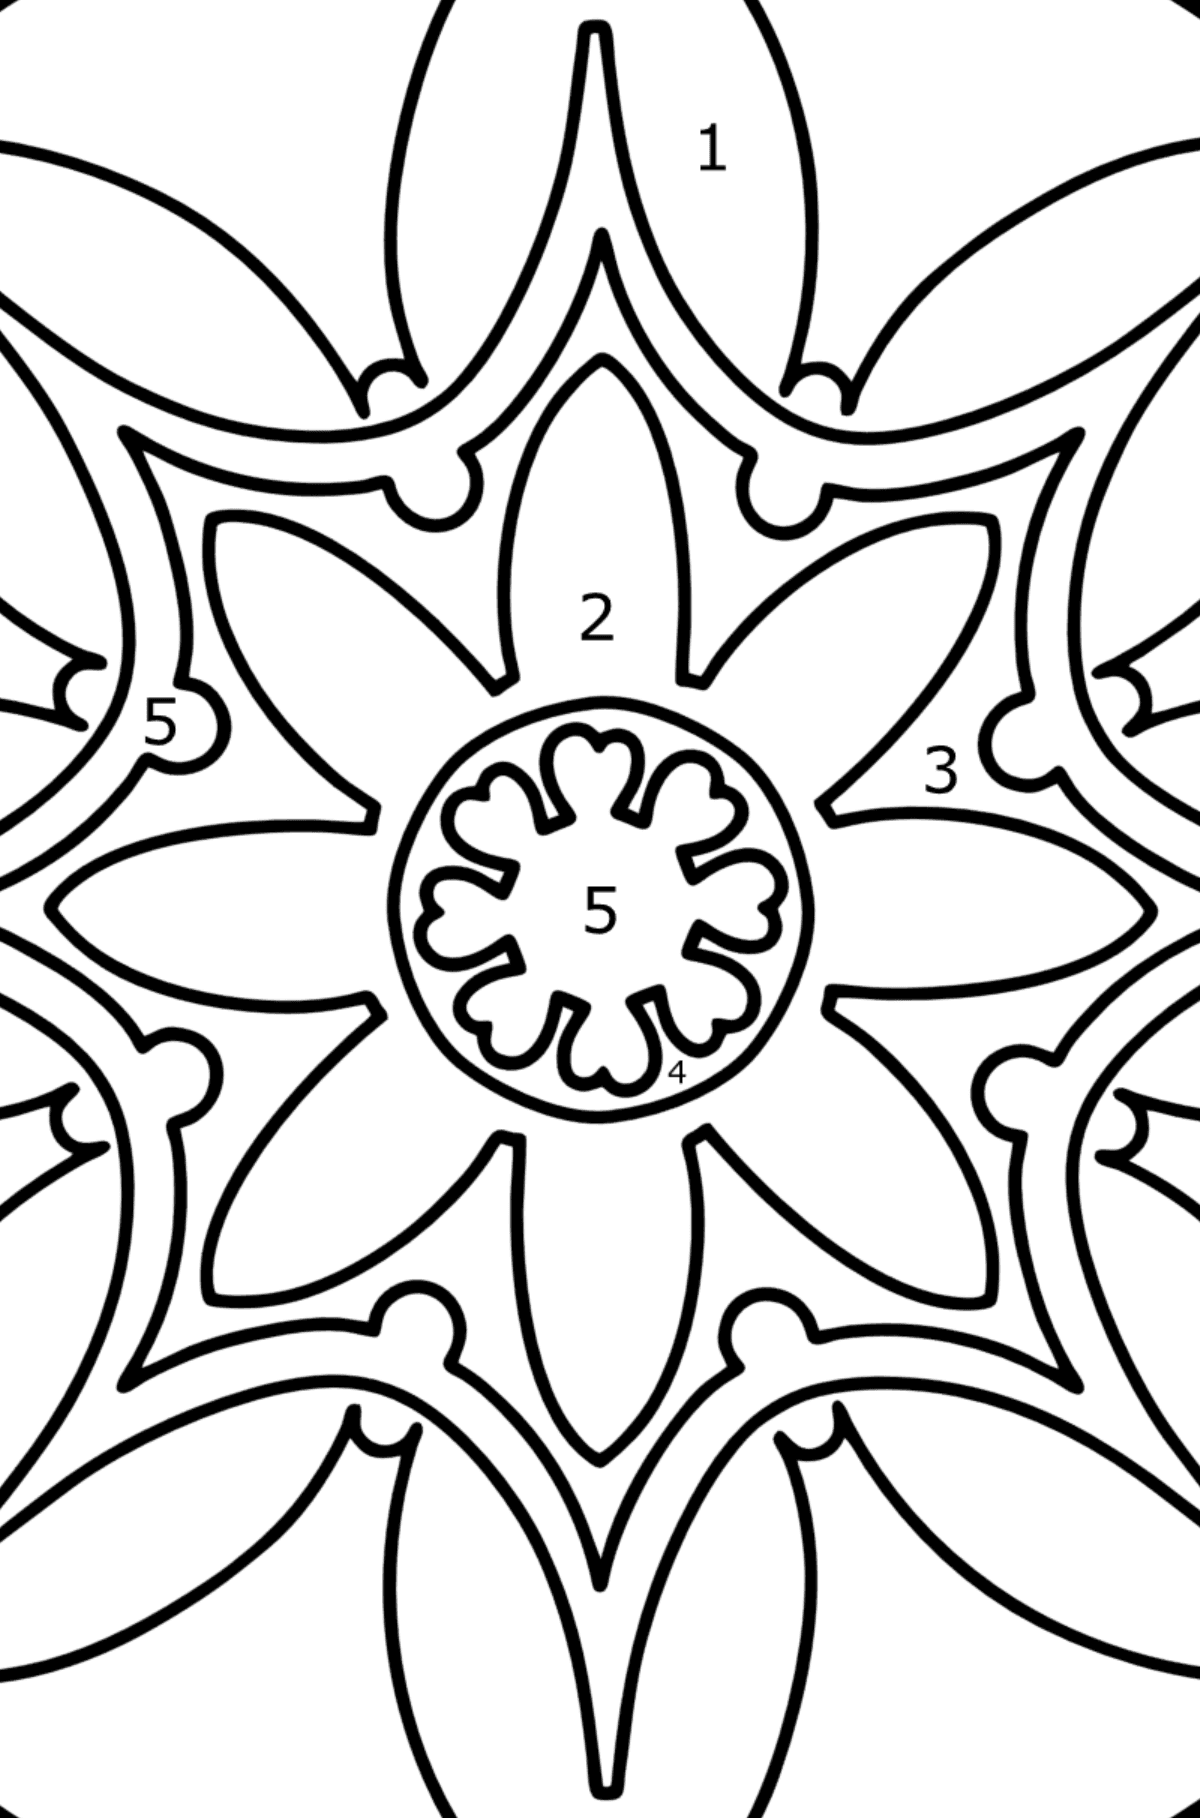 Mandala coloring page - 7 elements - Coloring by Numbers for Kids